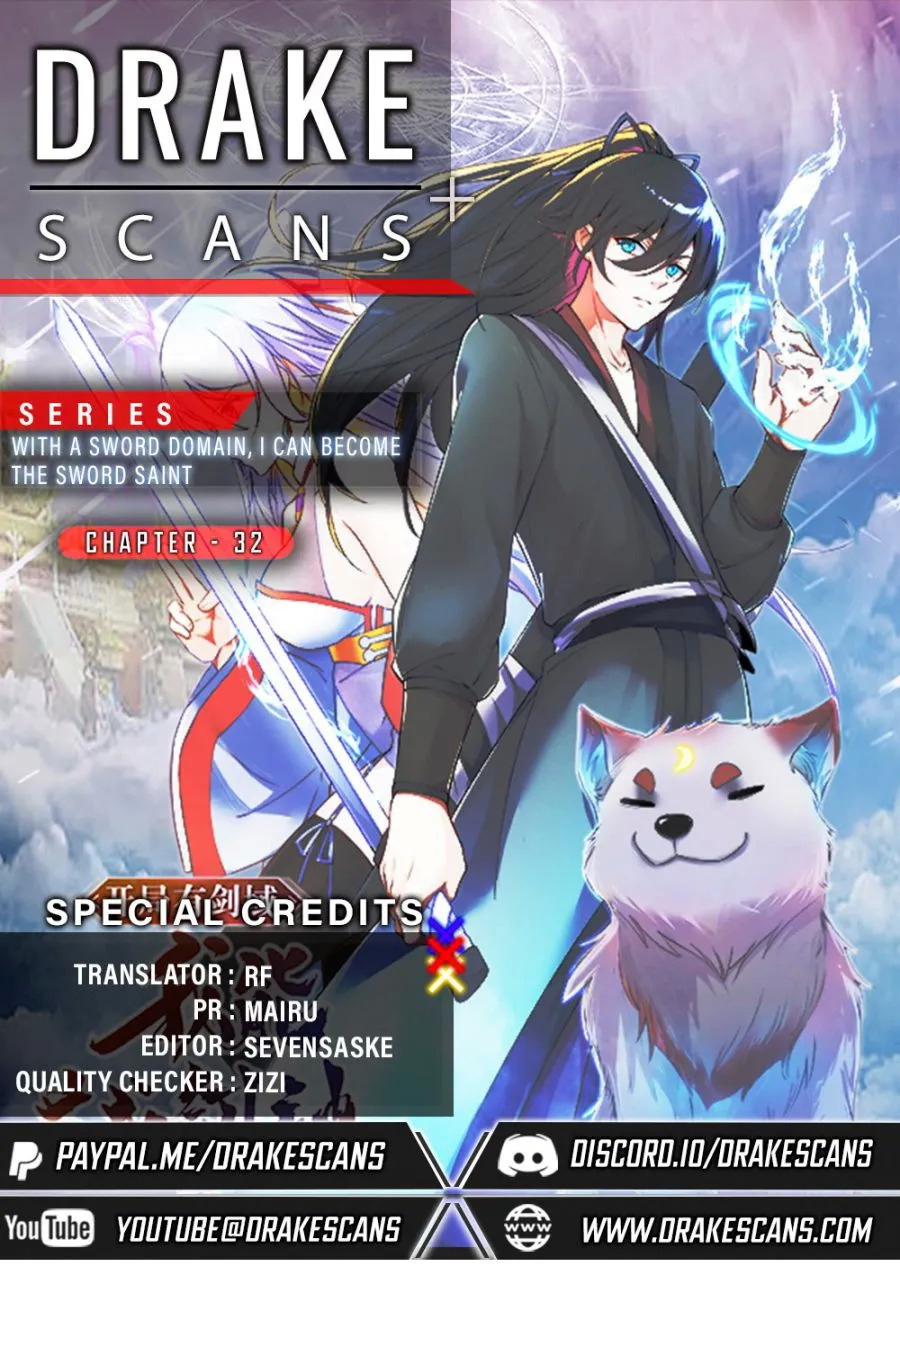 With A Sword Domain, I Can Become The Sword Saint Chapter 32